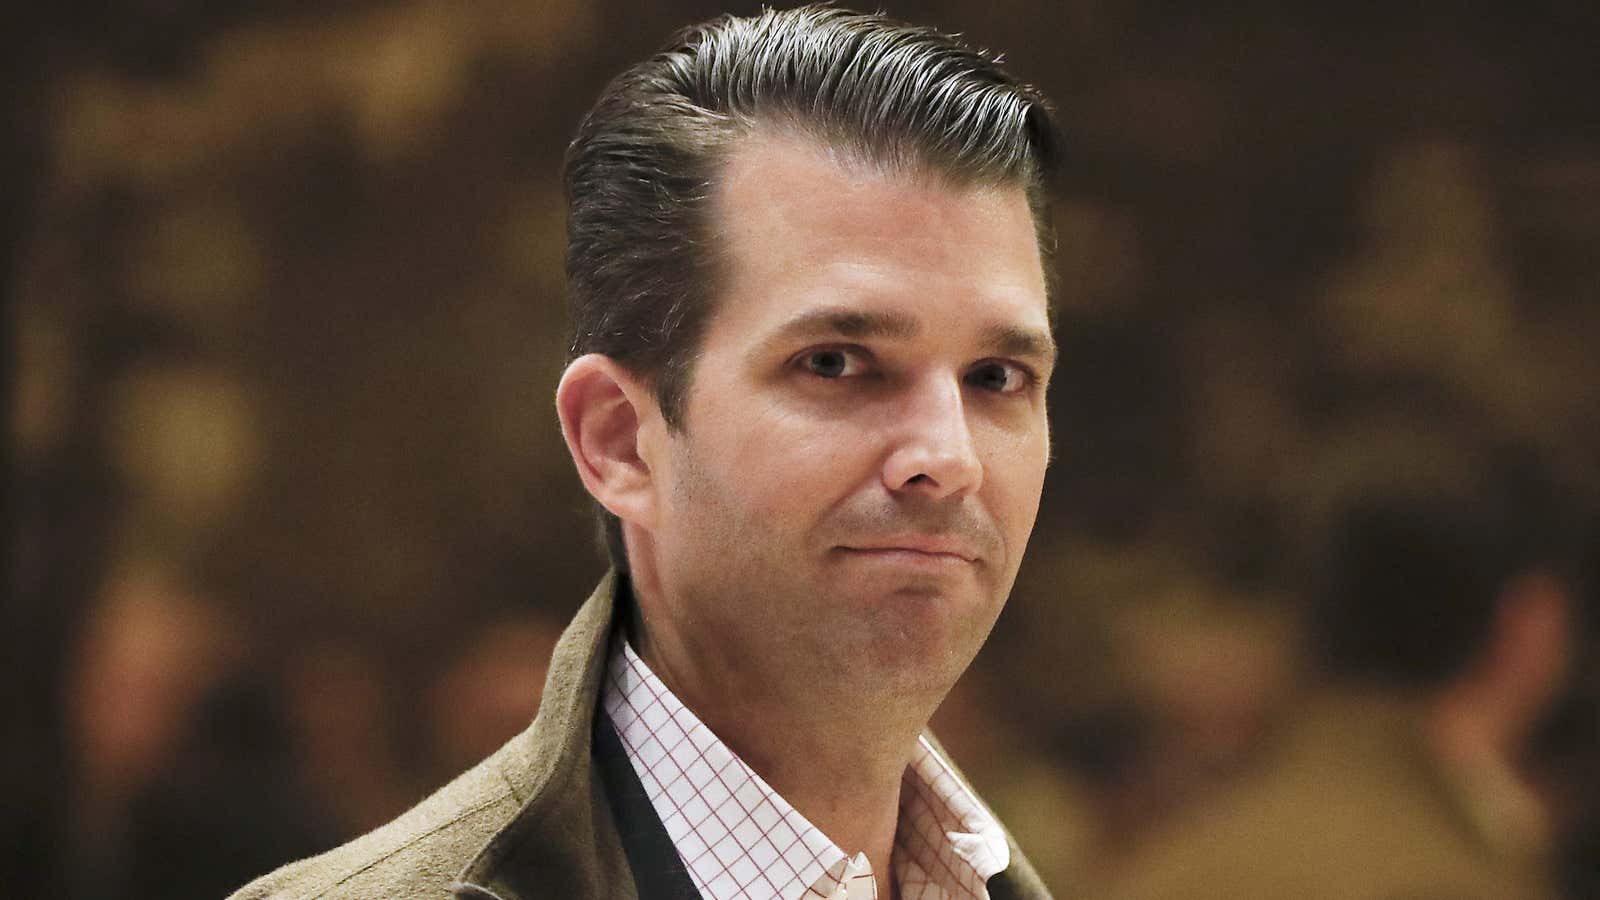 “He’s very hard on Don Jr., harder than he is on lvanka or Eric,” Cohen said.